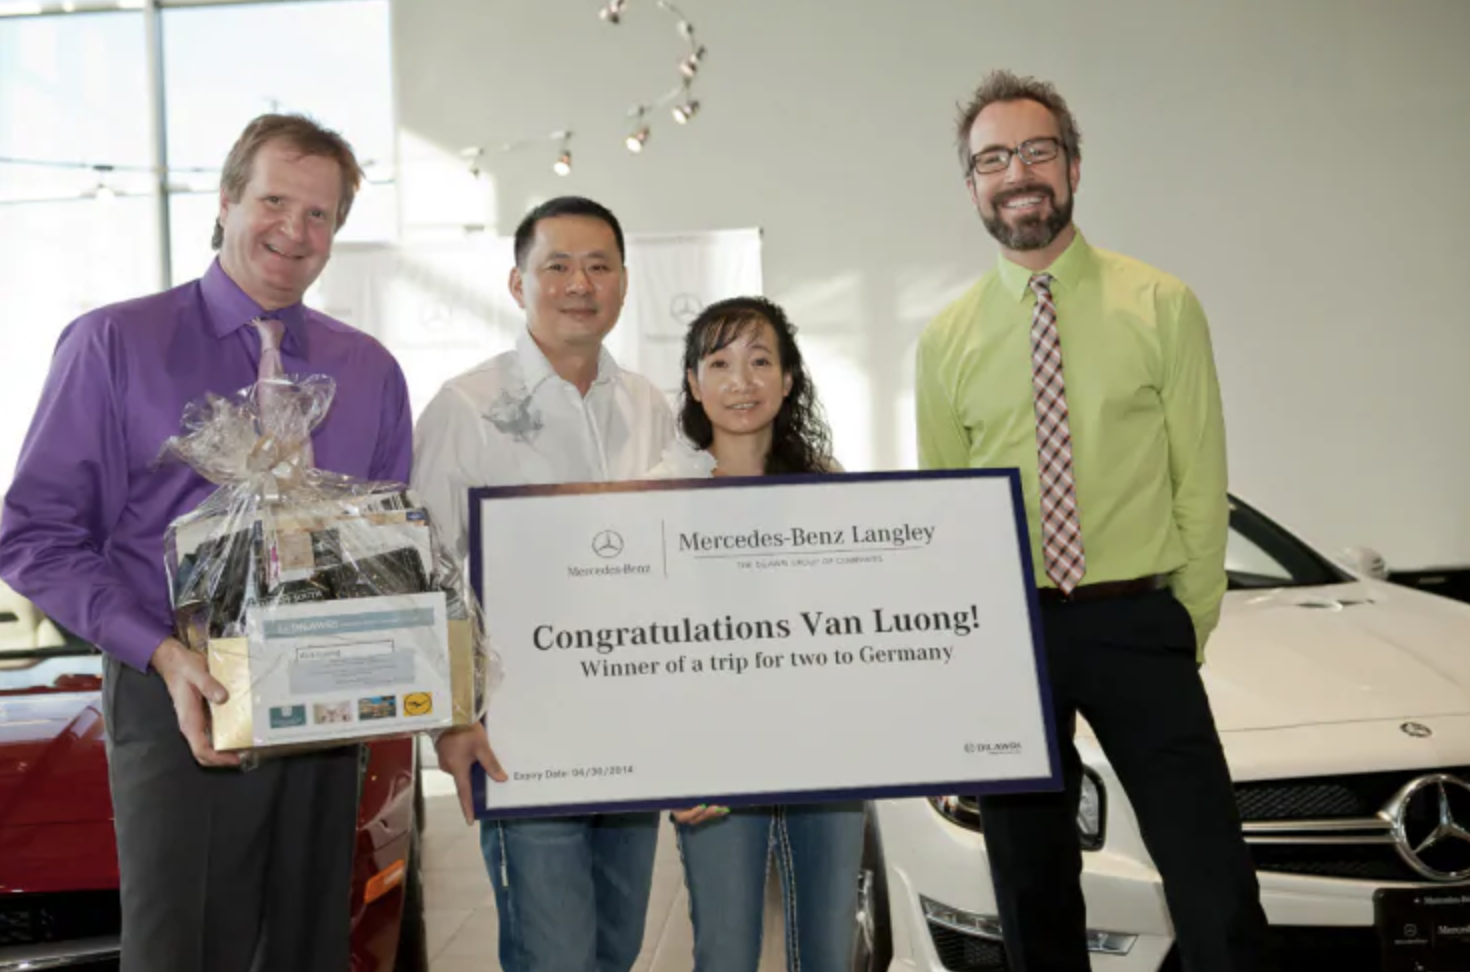 Van and Loan Tran Luong winners of a trip to Germany.